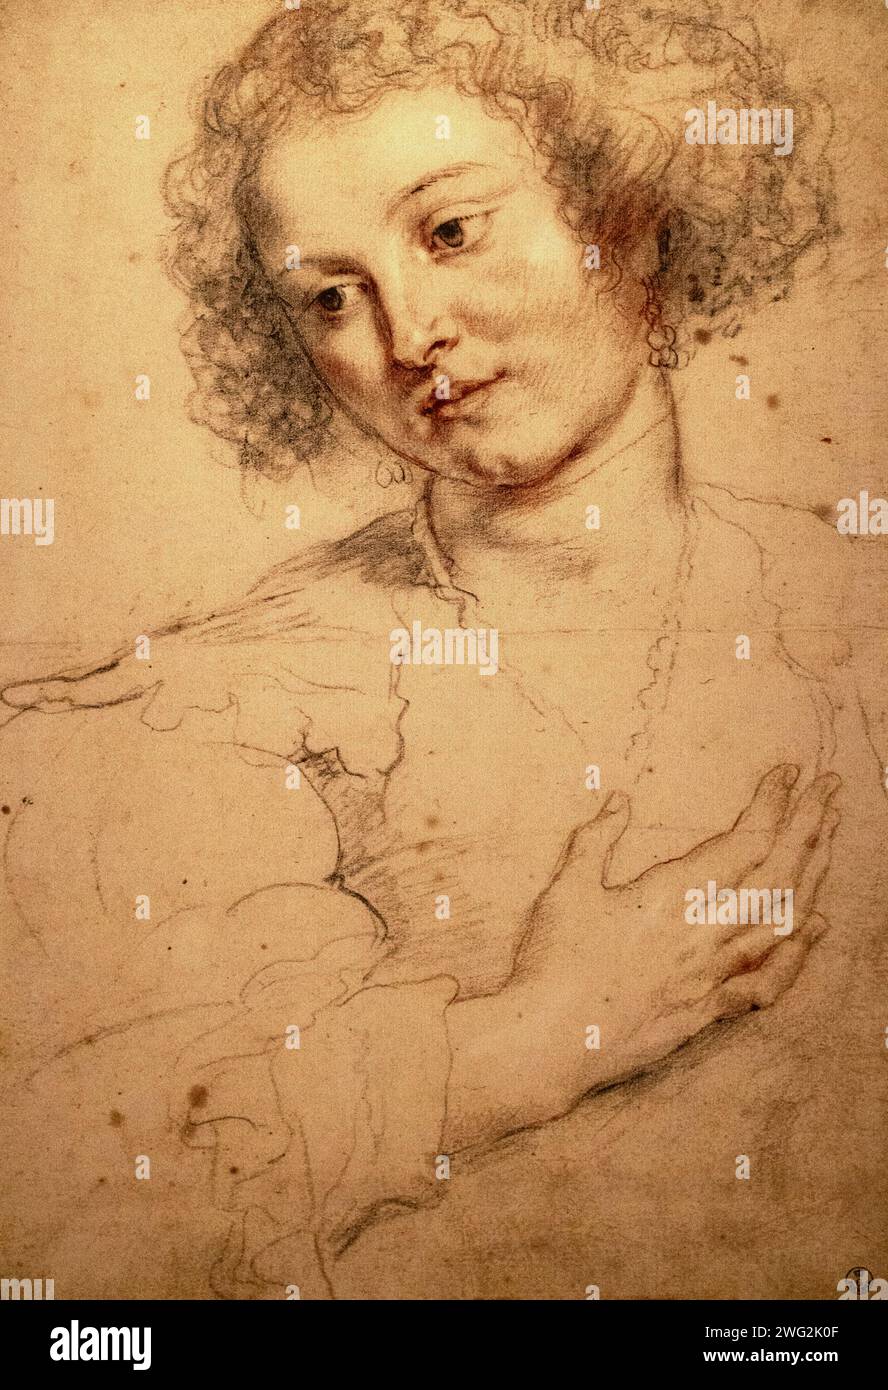 Peter Paul Rubens drawing, 'Young woman looking down' (Study for head of Saint Apollonia), 1628. Black and red chalk. 17th century womans portrait. Stock Photo